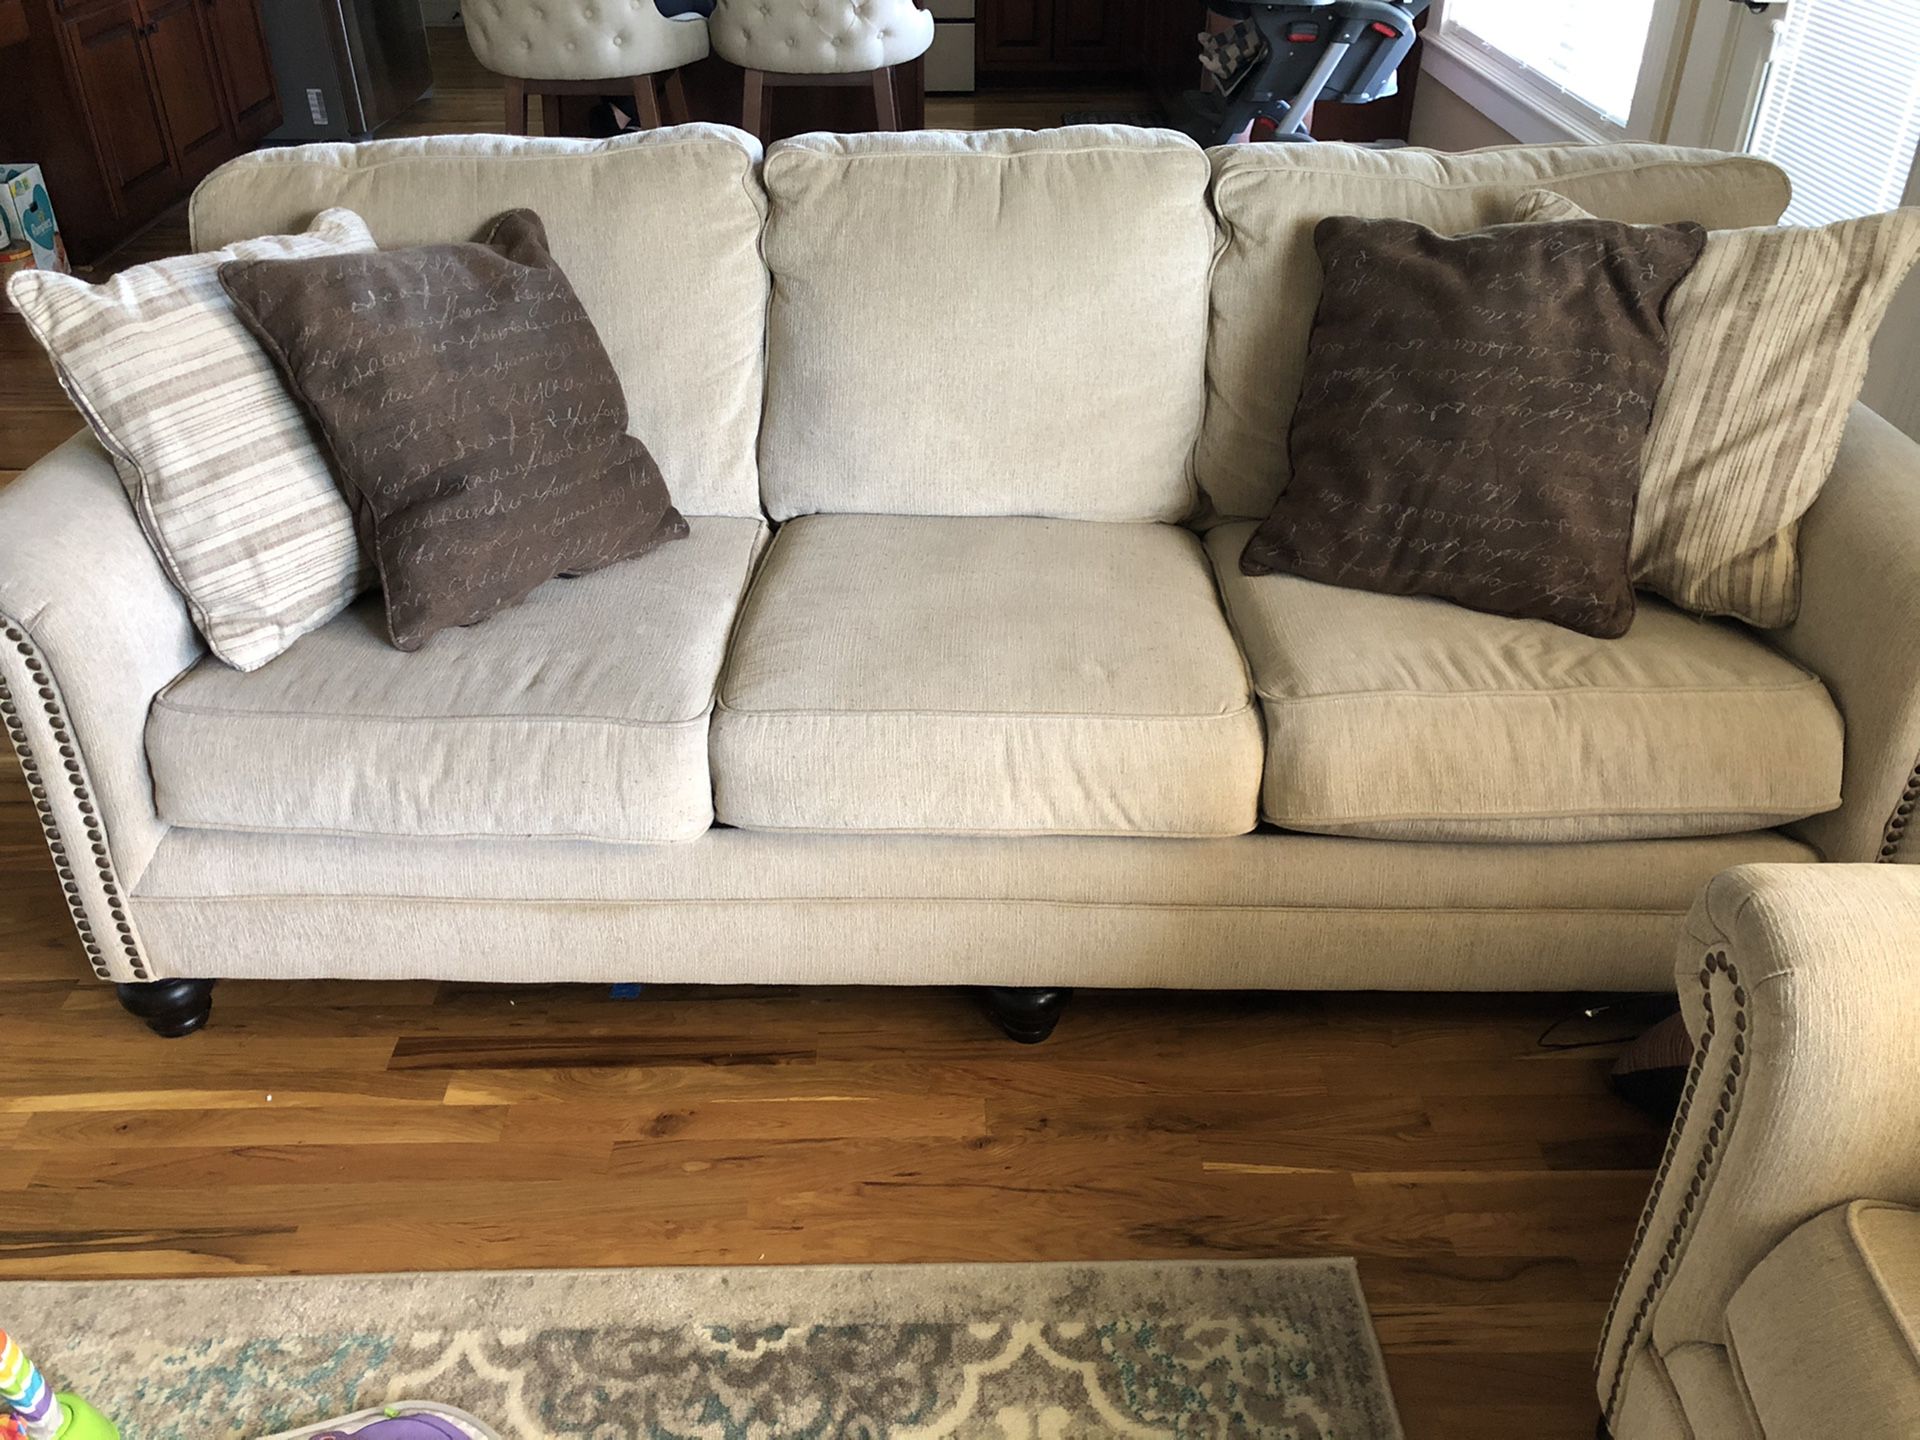 Beige Ashley Furniture Couches (2)